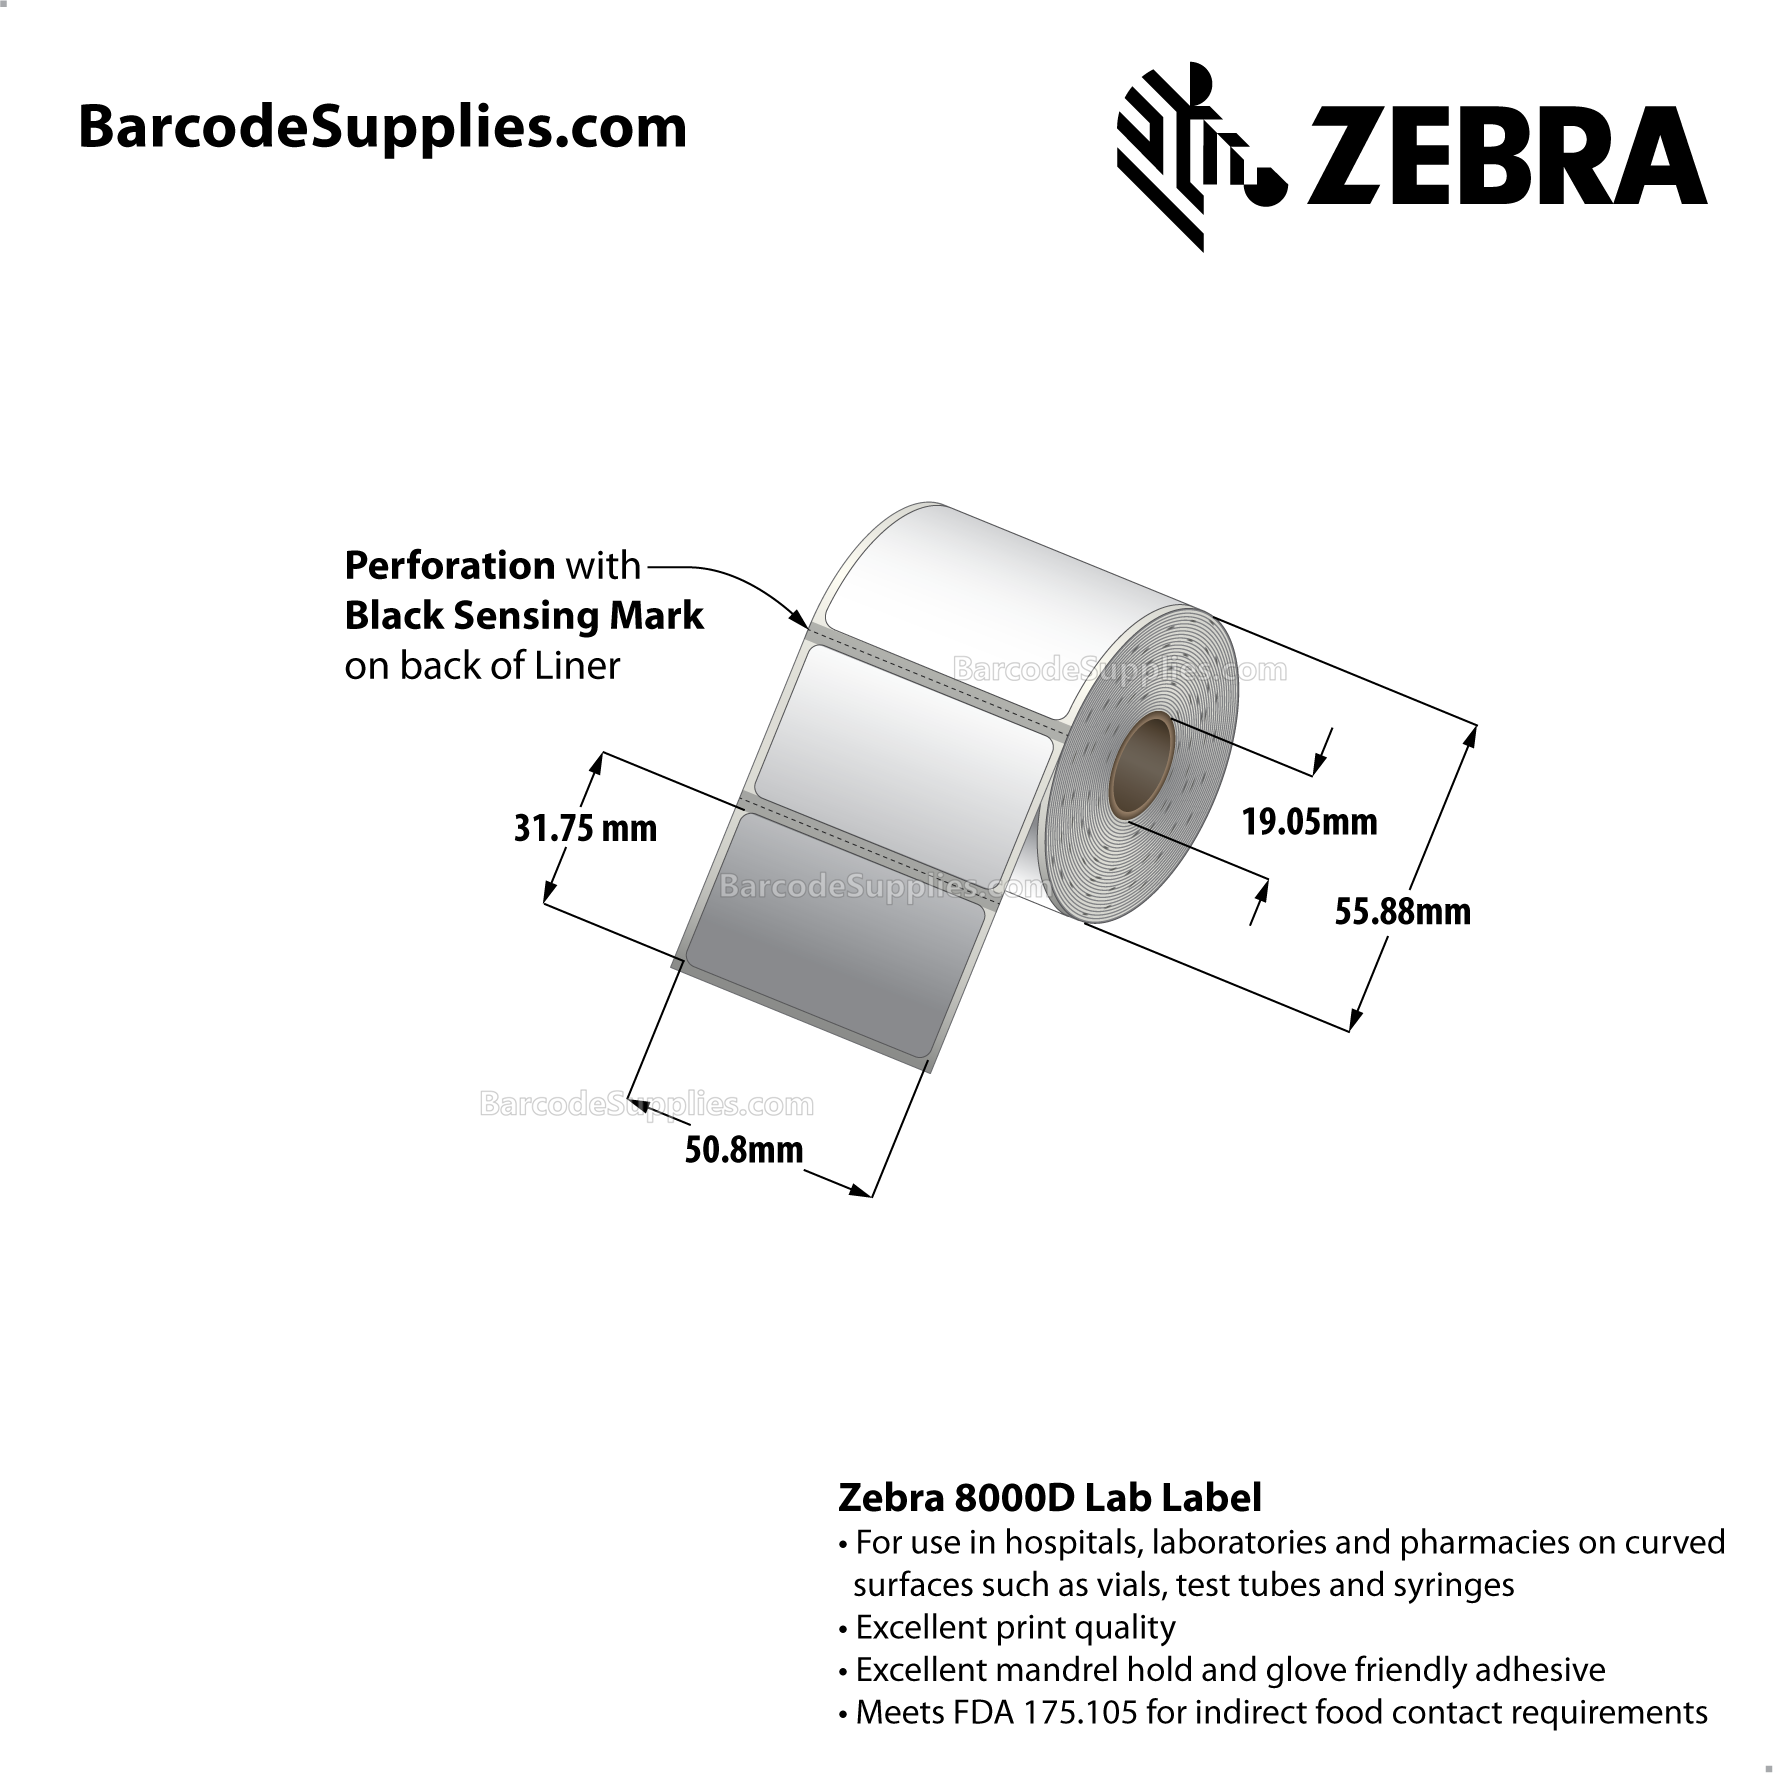 2 x 1.25 Direct Thermal White 8000D Lab Labels With Permanent Adhesive - Black mark sensing - Mobile specimen collection label for Cerner, McKesson, Siemens. - Perforated - 330 Labels Per Roll - Carton Of 12 Rolls - 3960 Labels Total - MPN: 10017573